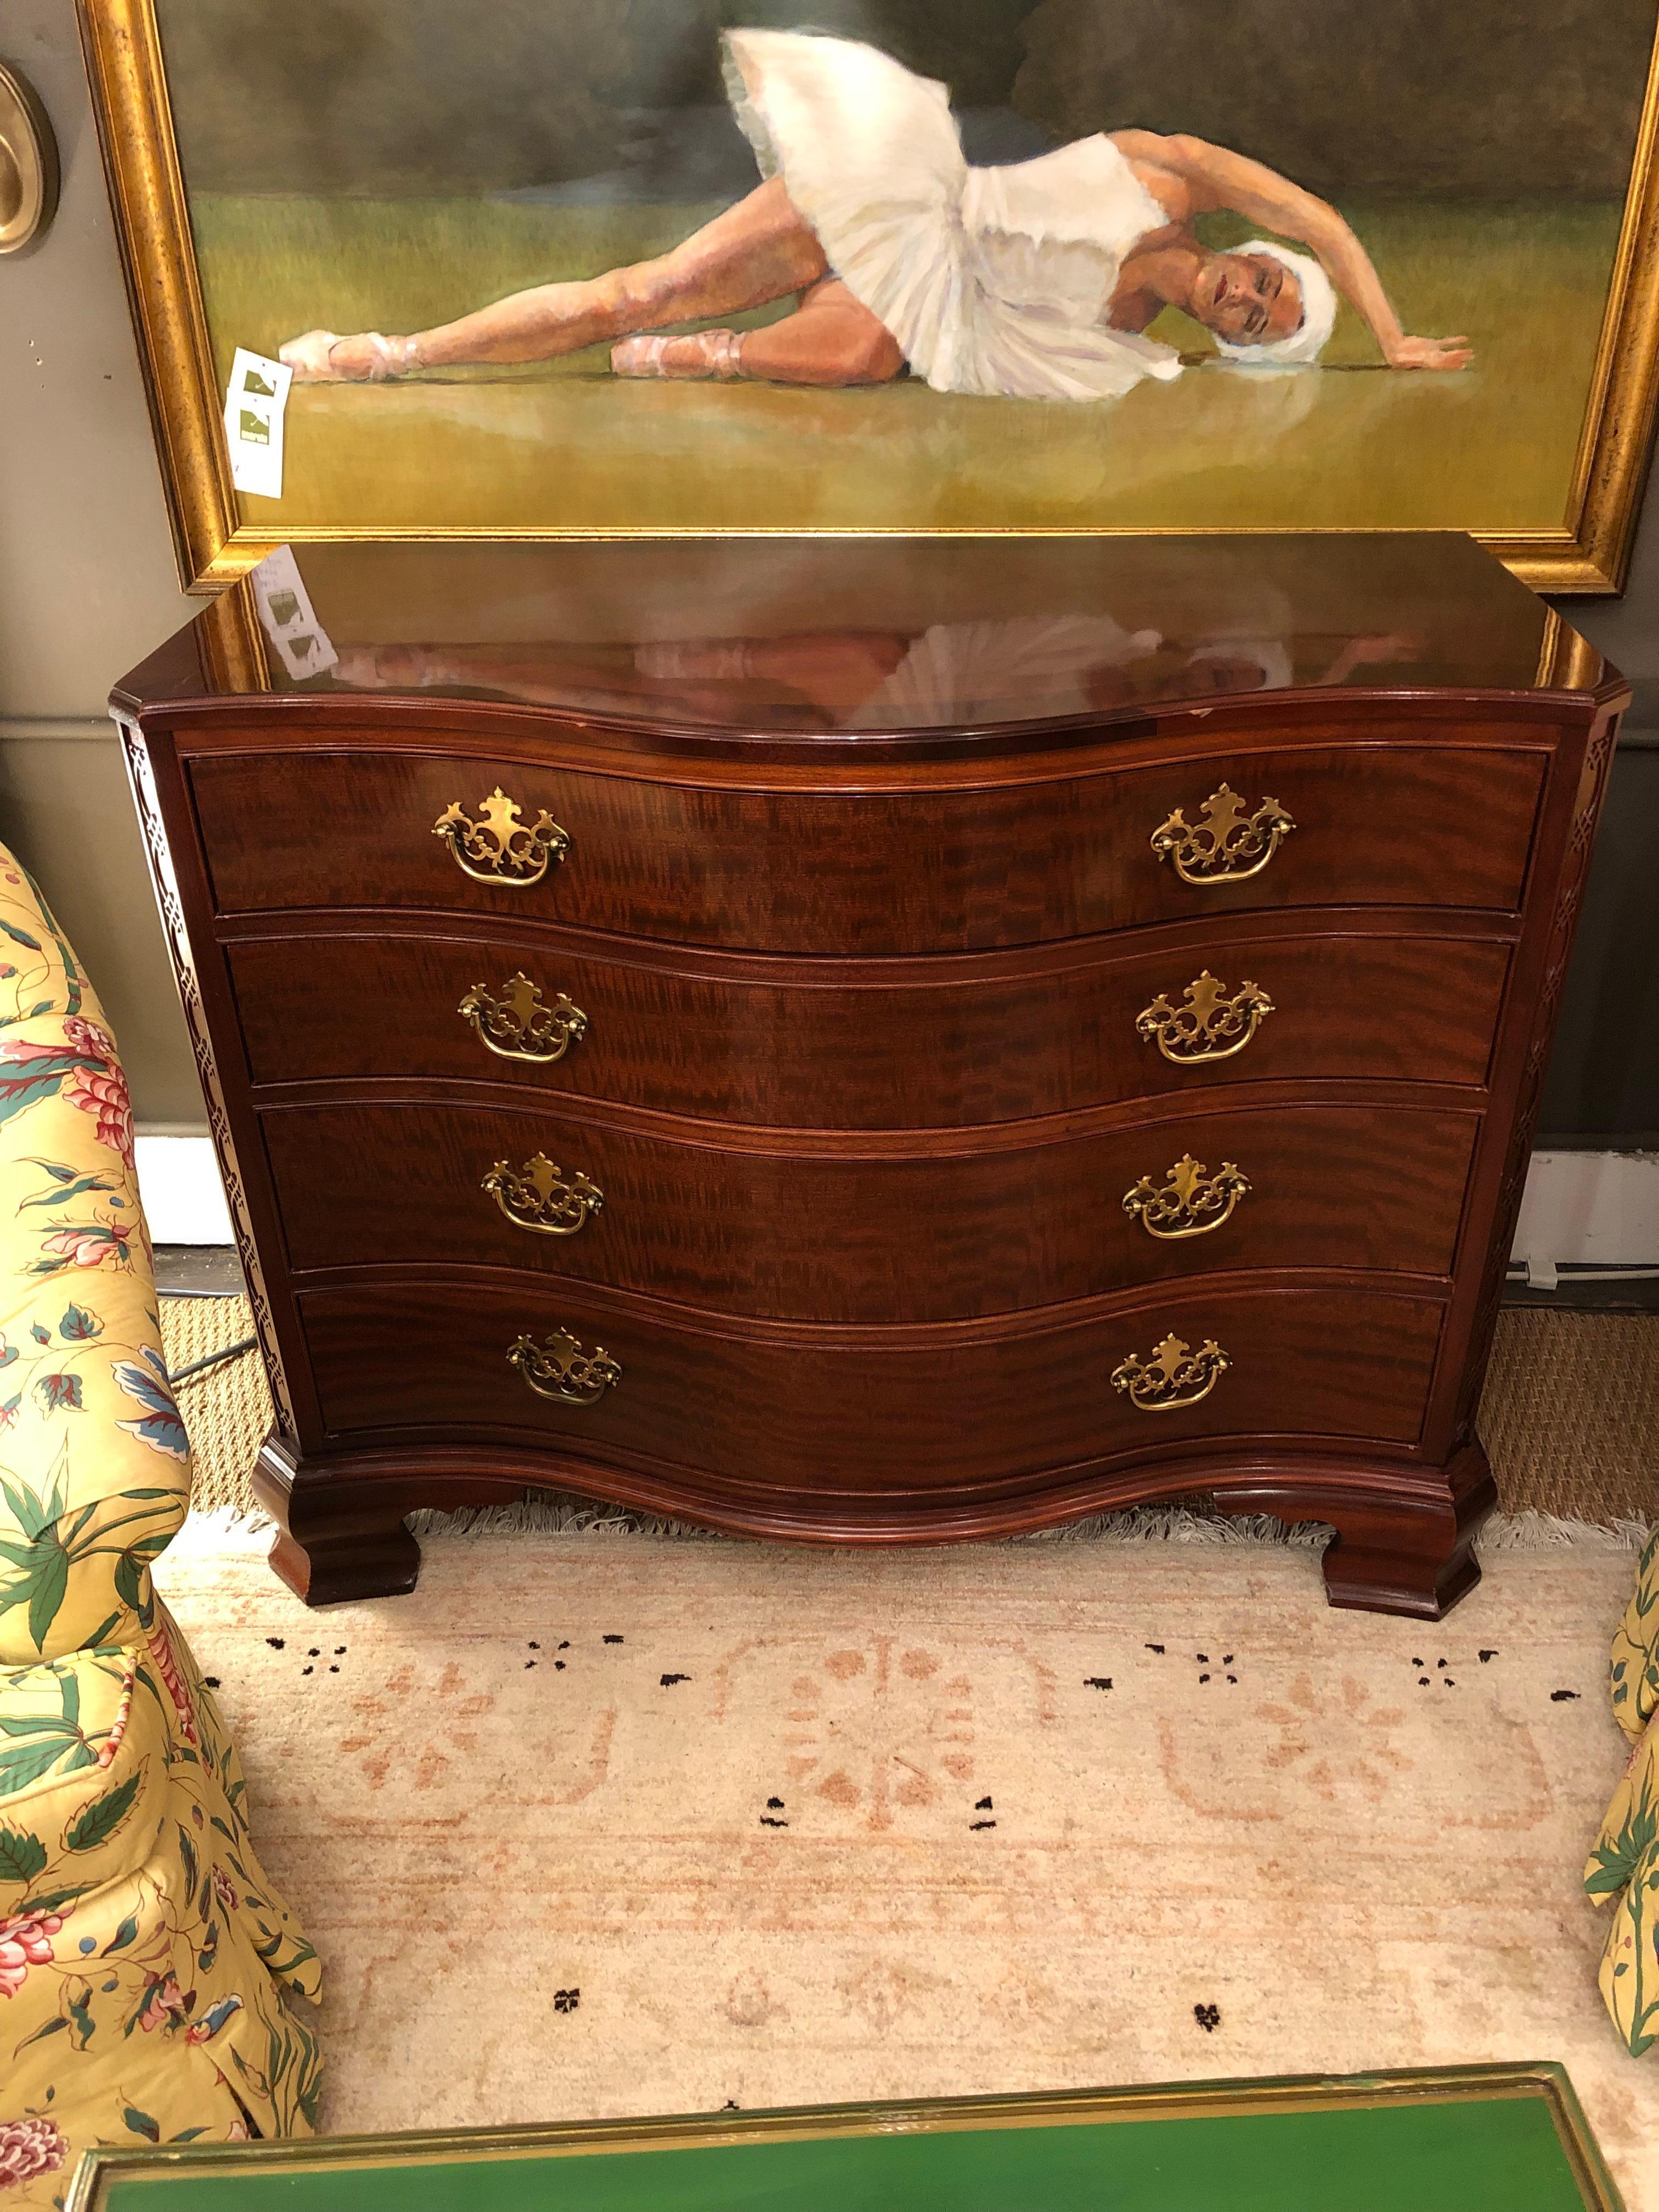 Baker honors Charleston's heritage and rich history by reproducing this 19th century bombay chest of drawers. Part of their “Historic Charleston” collection the top has a hand carved gadroon border, dovetailed drawers, classic brass pulls and